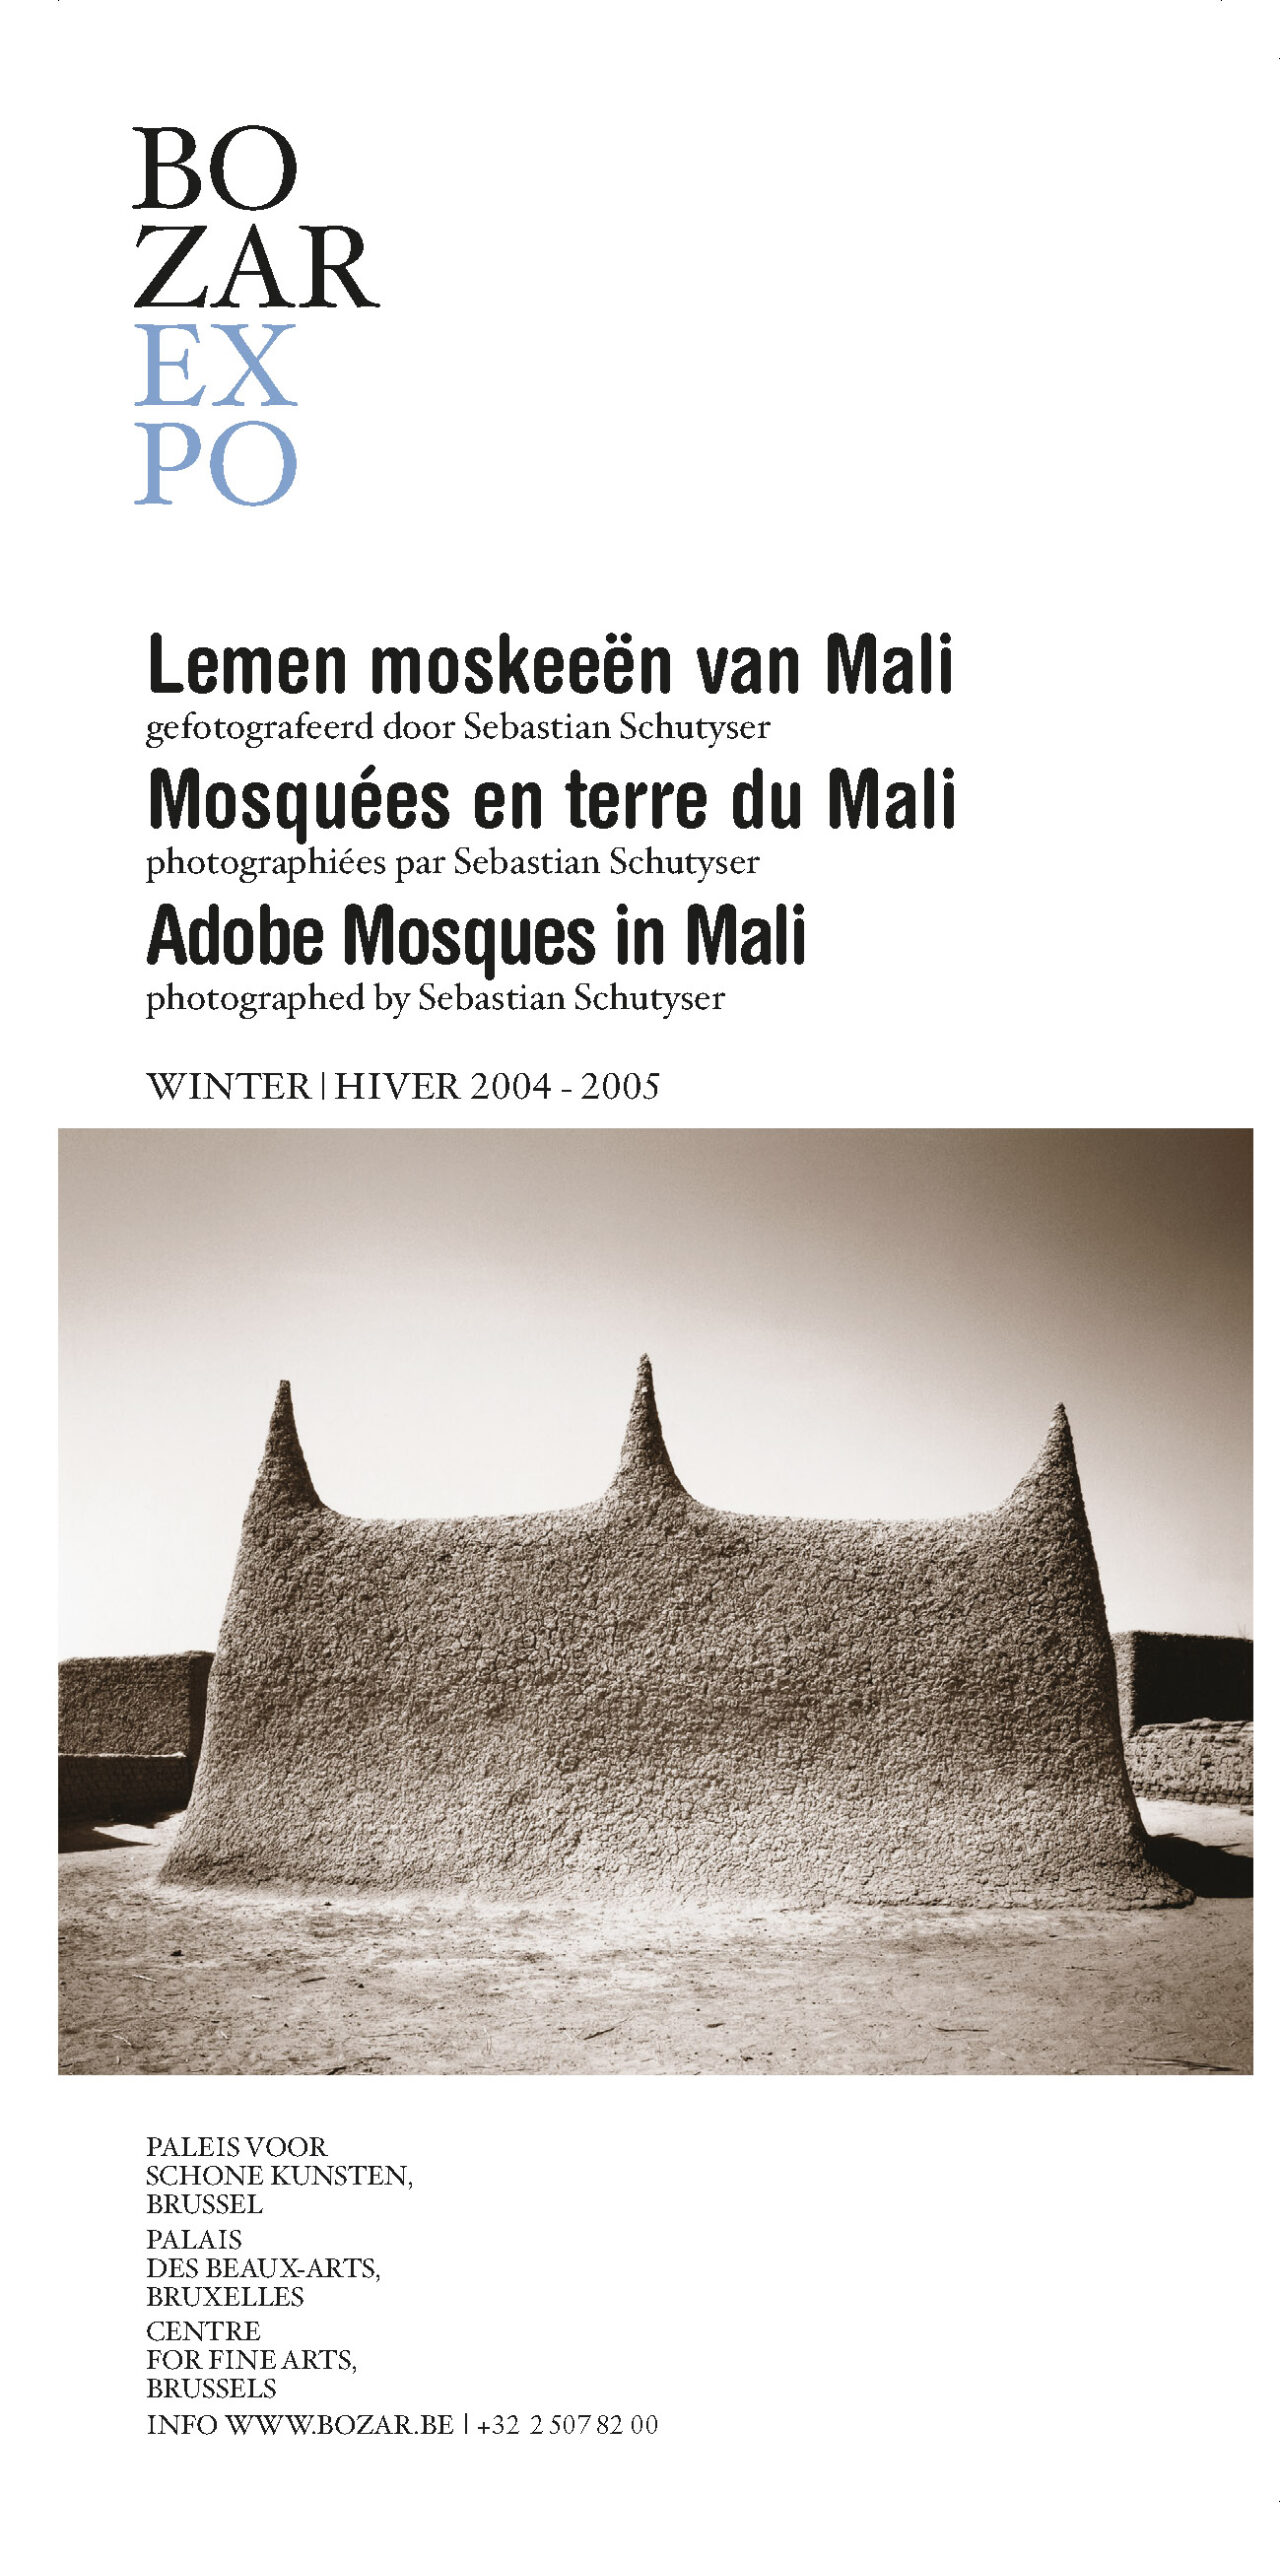 Adobe mosques in Mali exhibition at BOZAR Centre for Fine Arts in Brussels